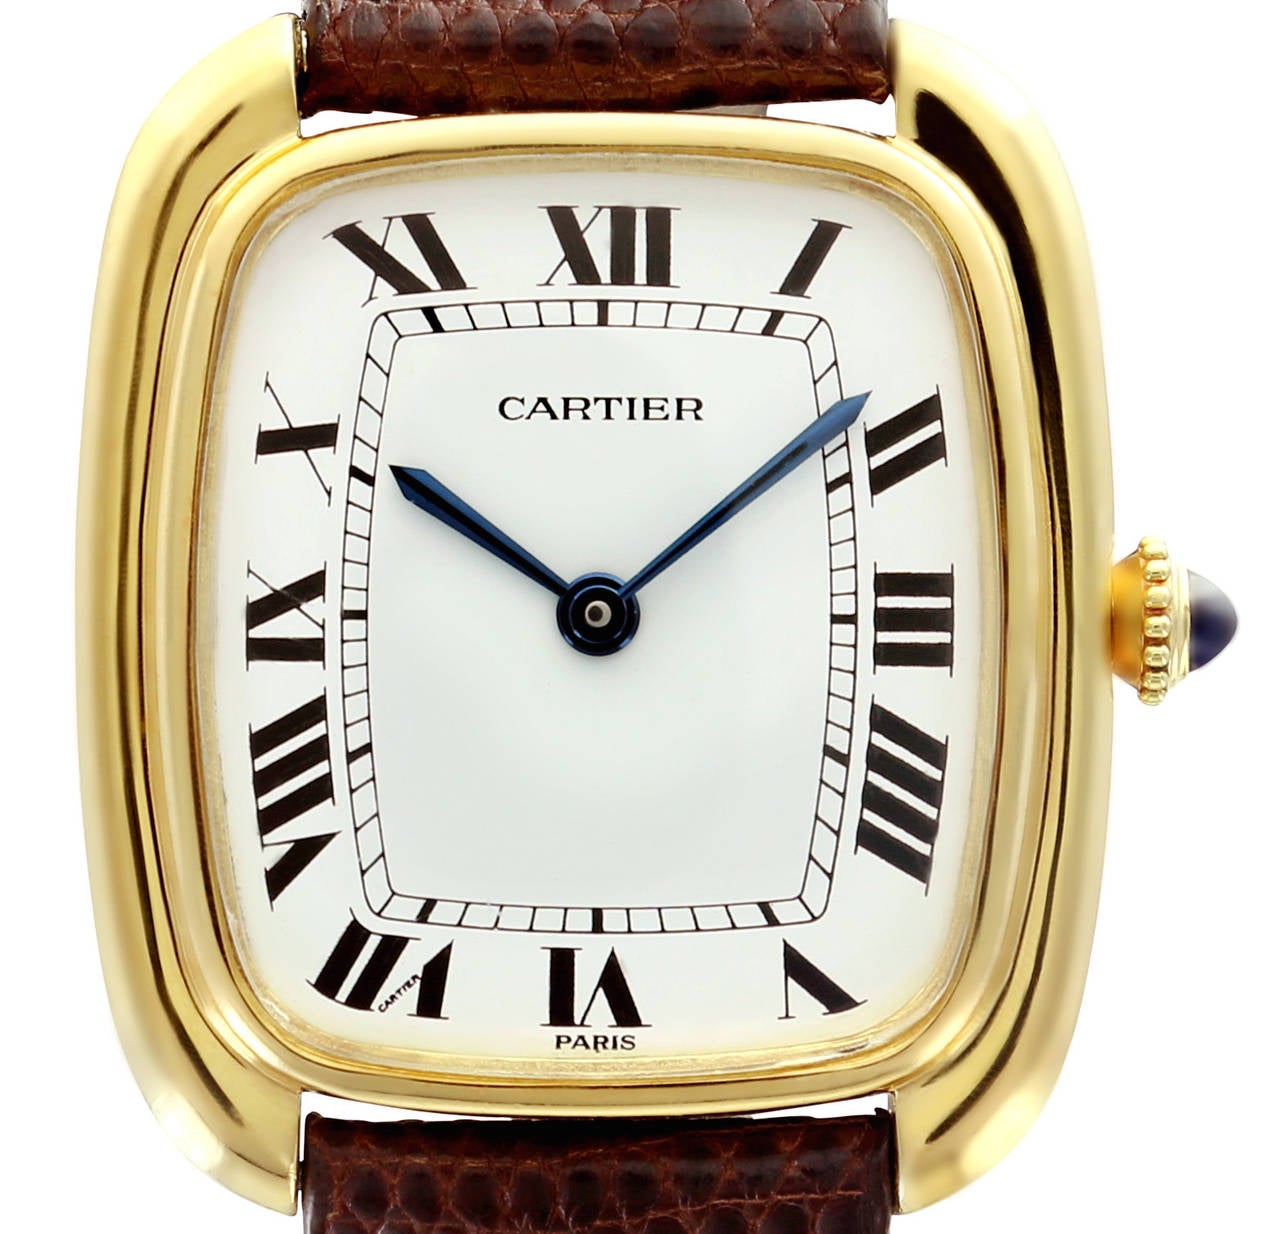 This beautiful, 1970s automatic Cartier Tank Gondole is a rare take on the classic Tank design while maintaining the iconic model's classic features. The Cartier Tank line was created in 1917 with a design inspired by the Renault tanks which Louis